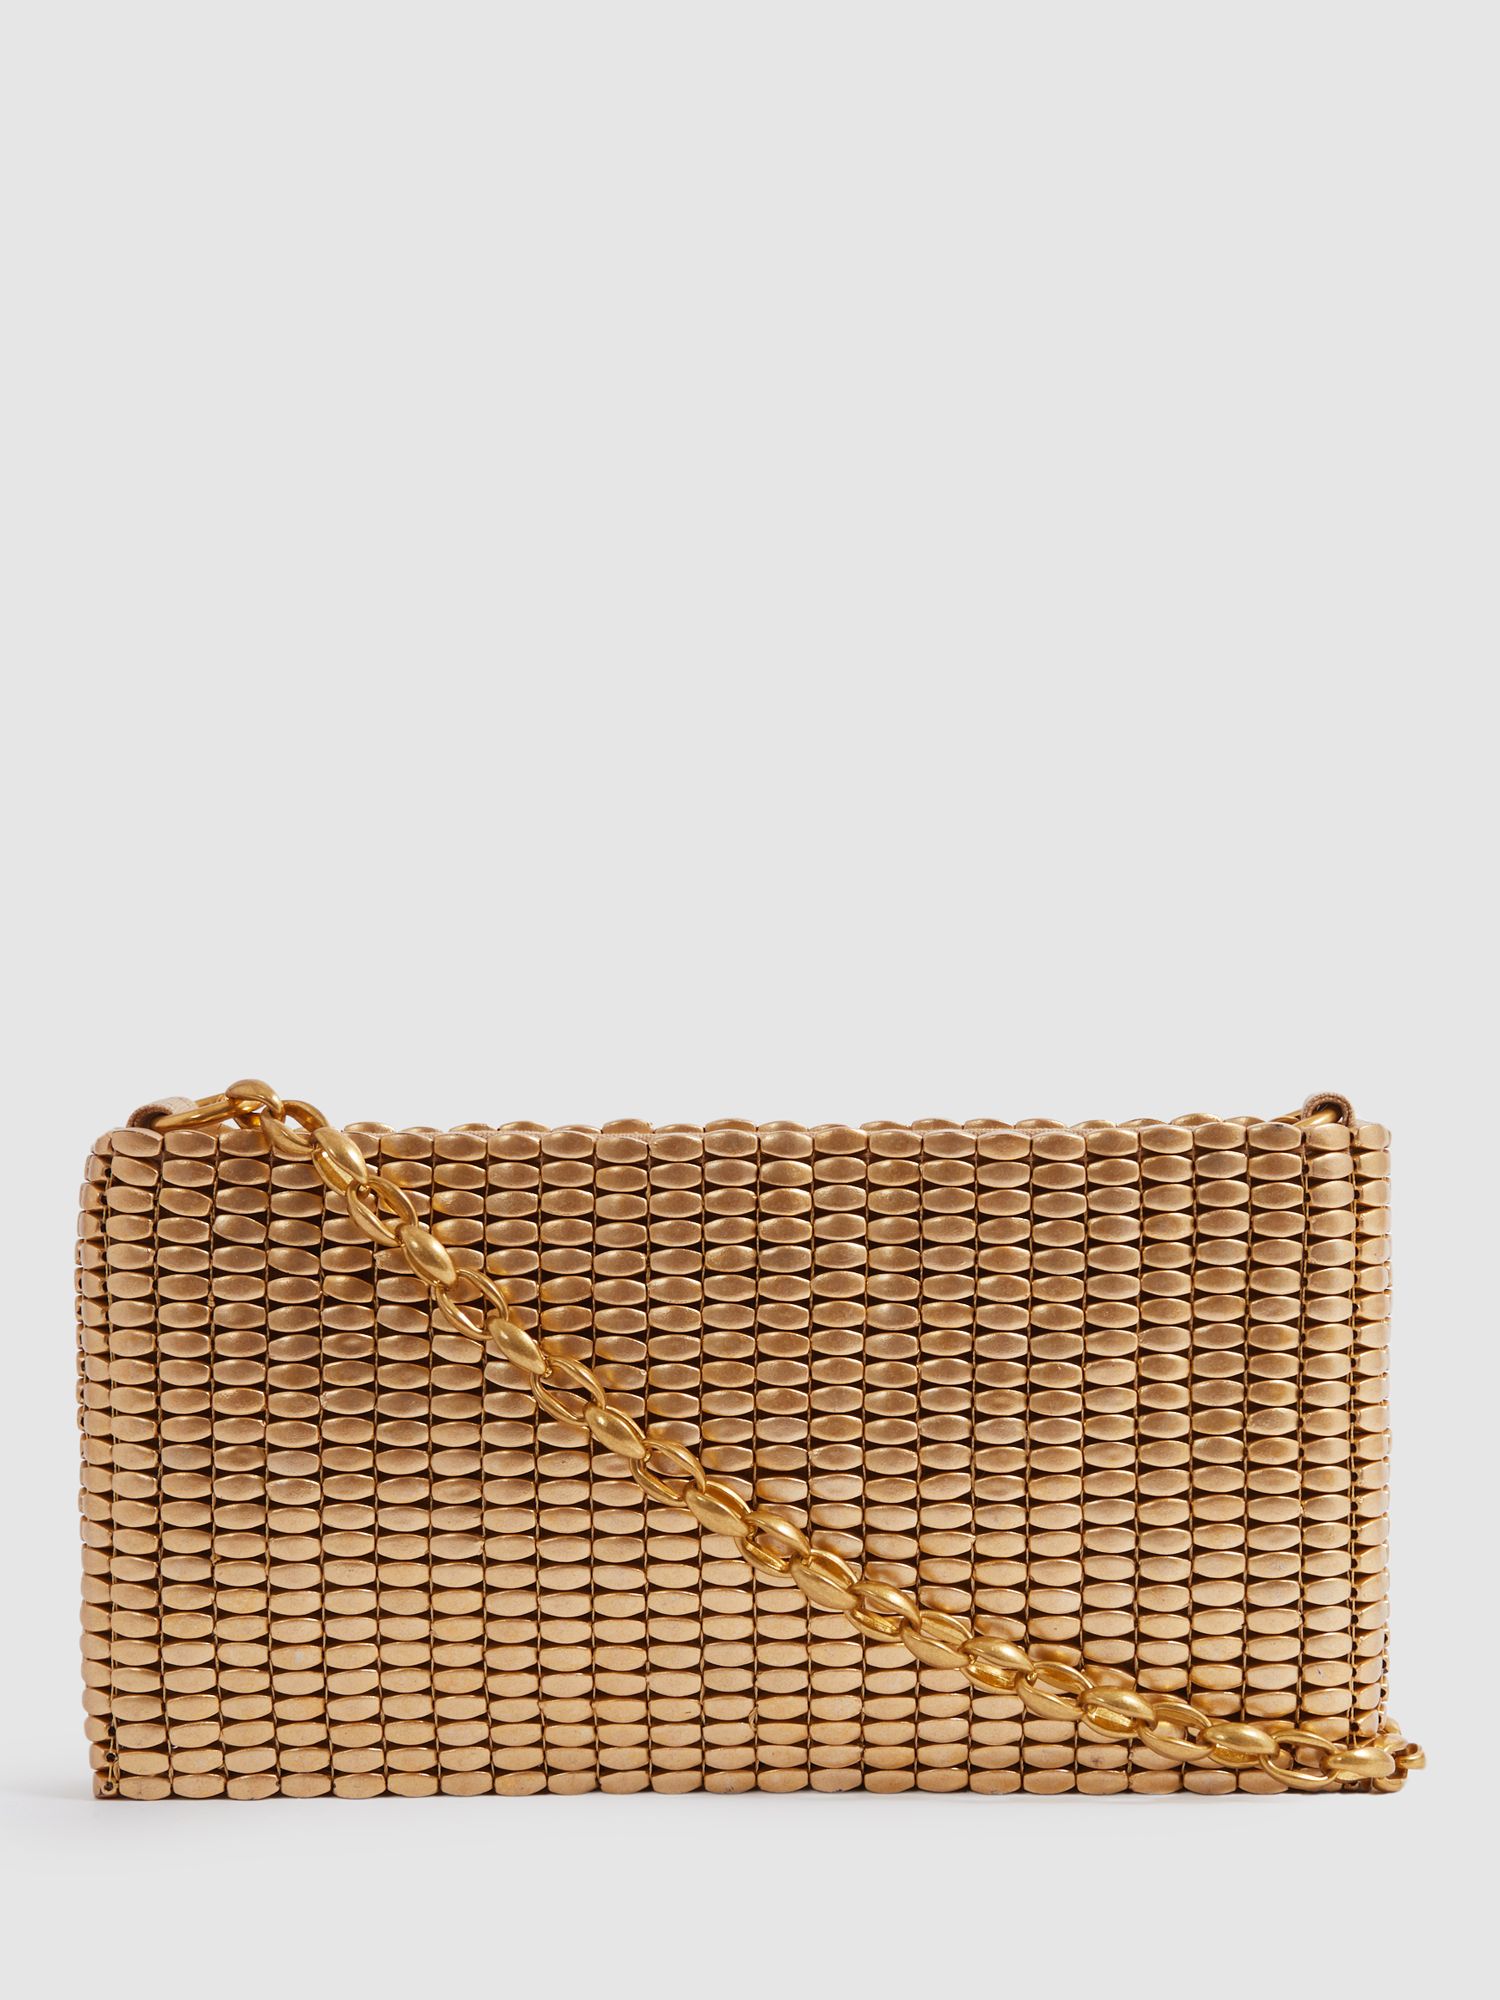 Buy Reiss Bailey Beaded Clutch Bag, Gold Online at johnlewis.com